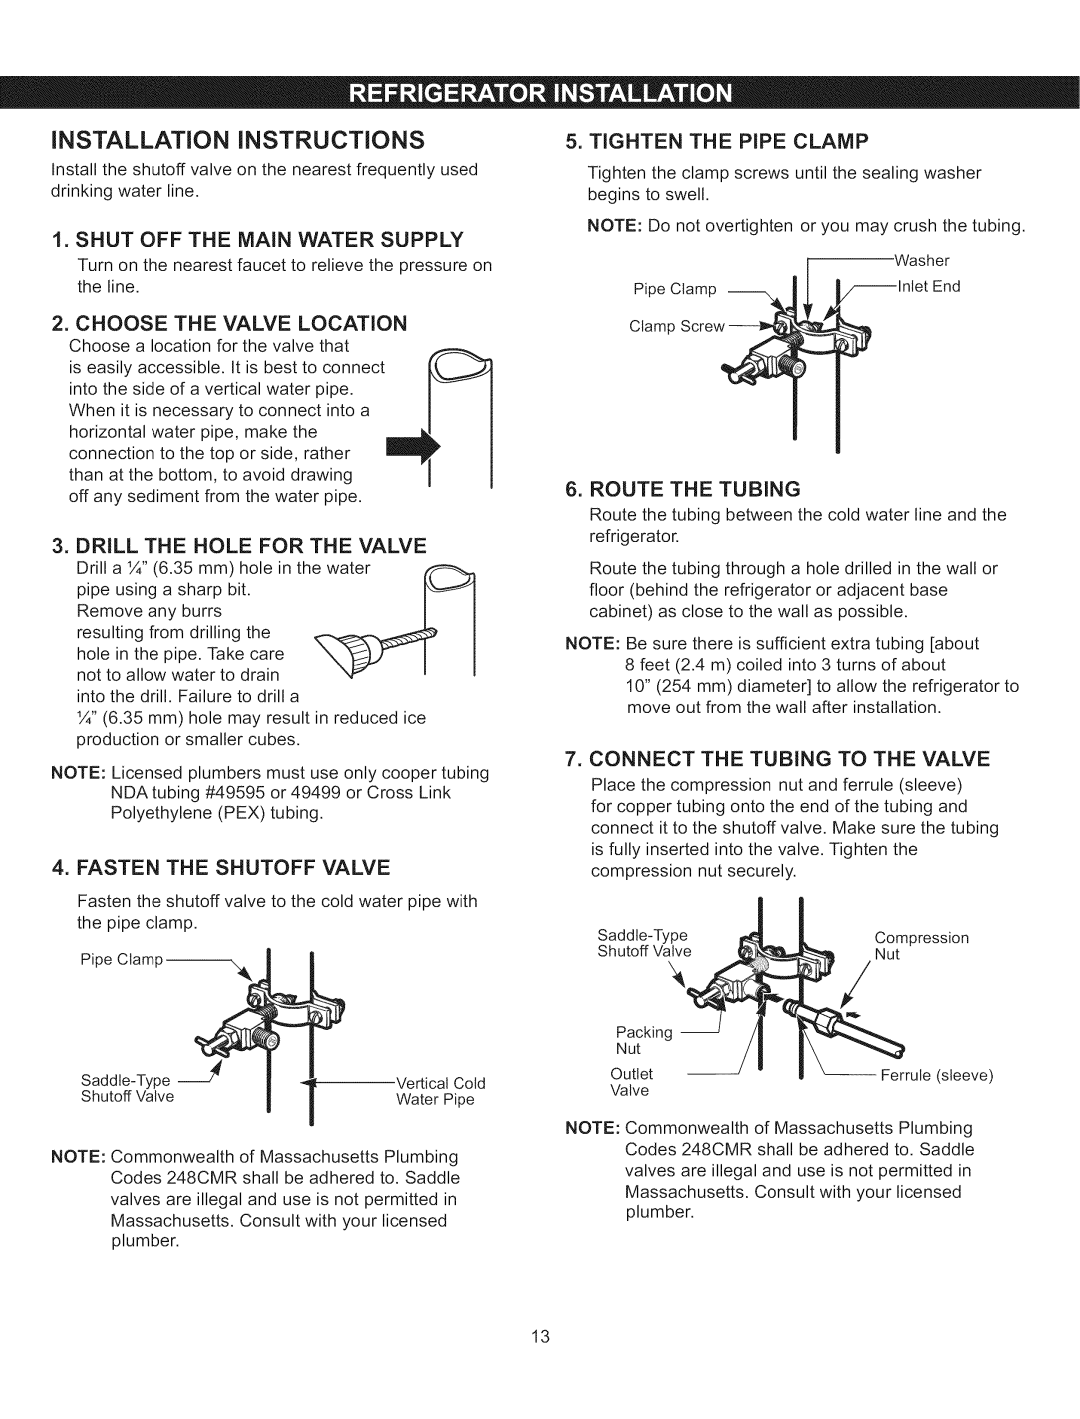 Kenmore 795.5108 iNSTALLATiON iNSTRUCTiONS, Shut Off The Main Water Supply, Choose The Valve Location, Route The Tubing 